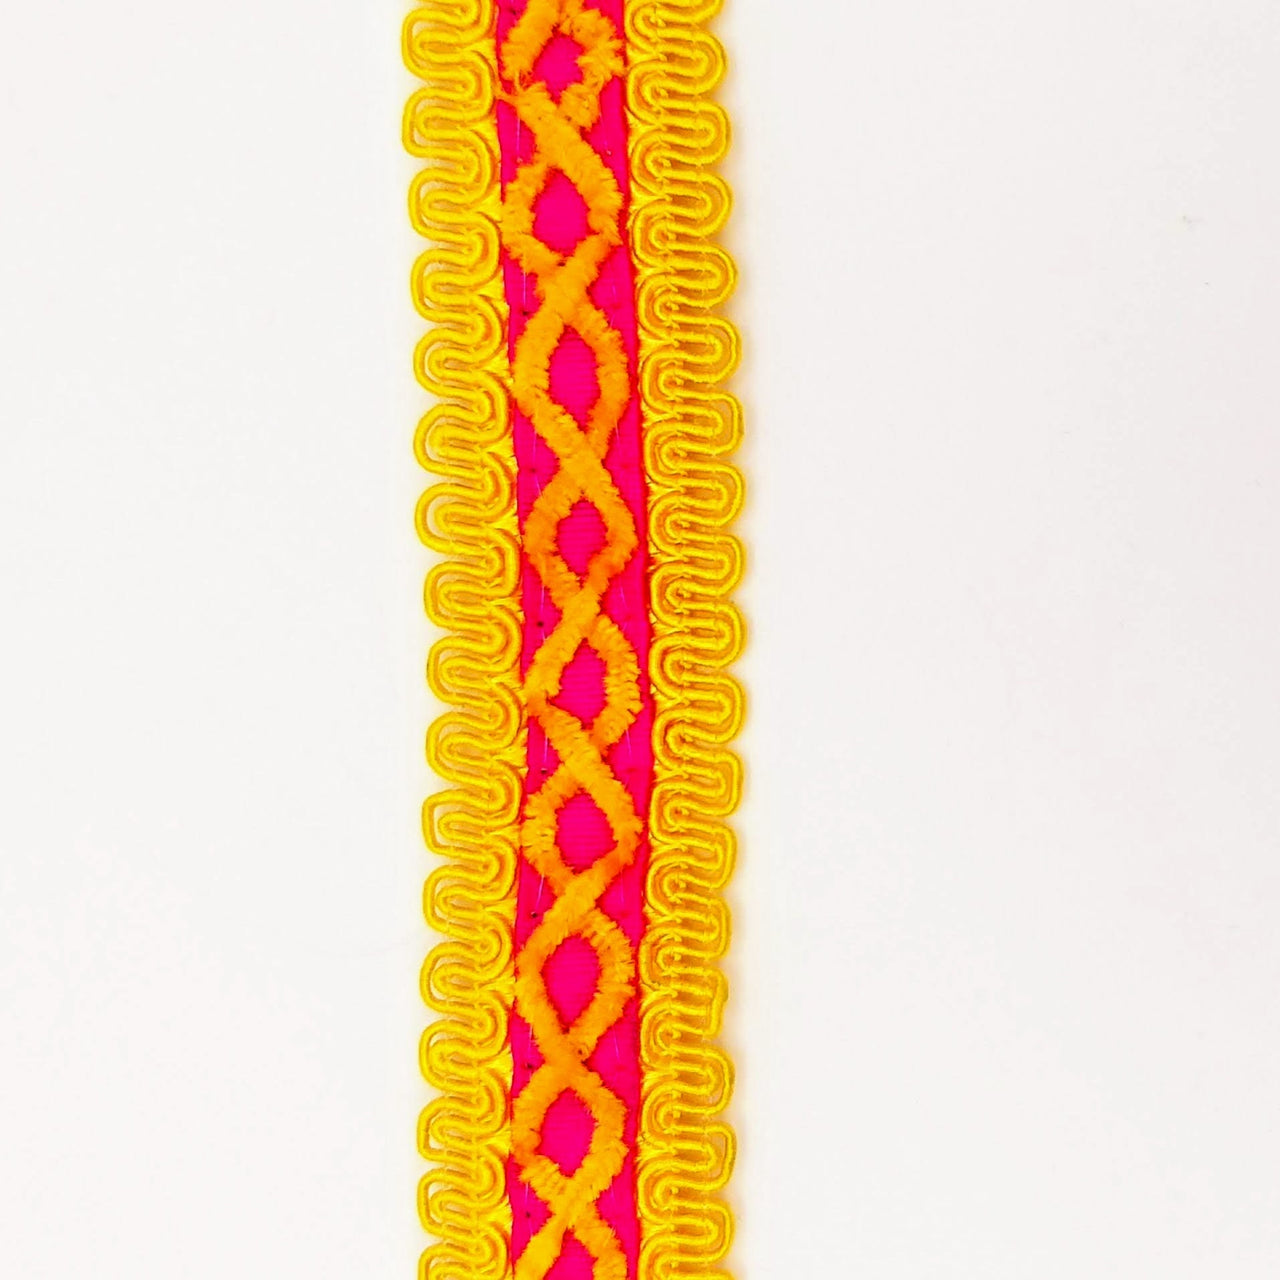 Orange Cotton Fabric Lace Trim with Yellow Thread Embroidery, Trim By 3 Yards, Craft Decorative Ribbon